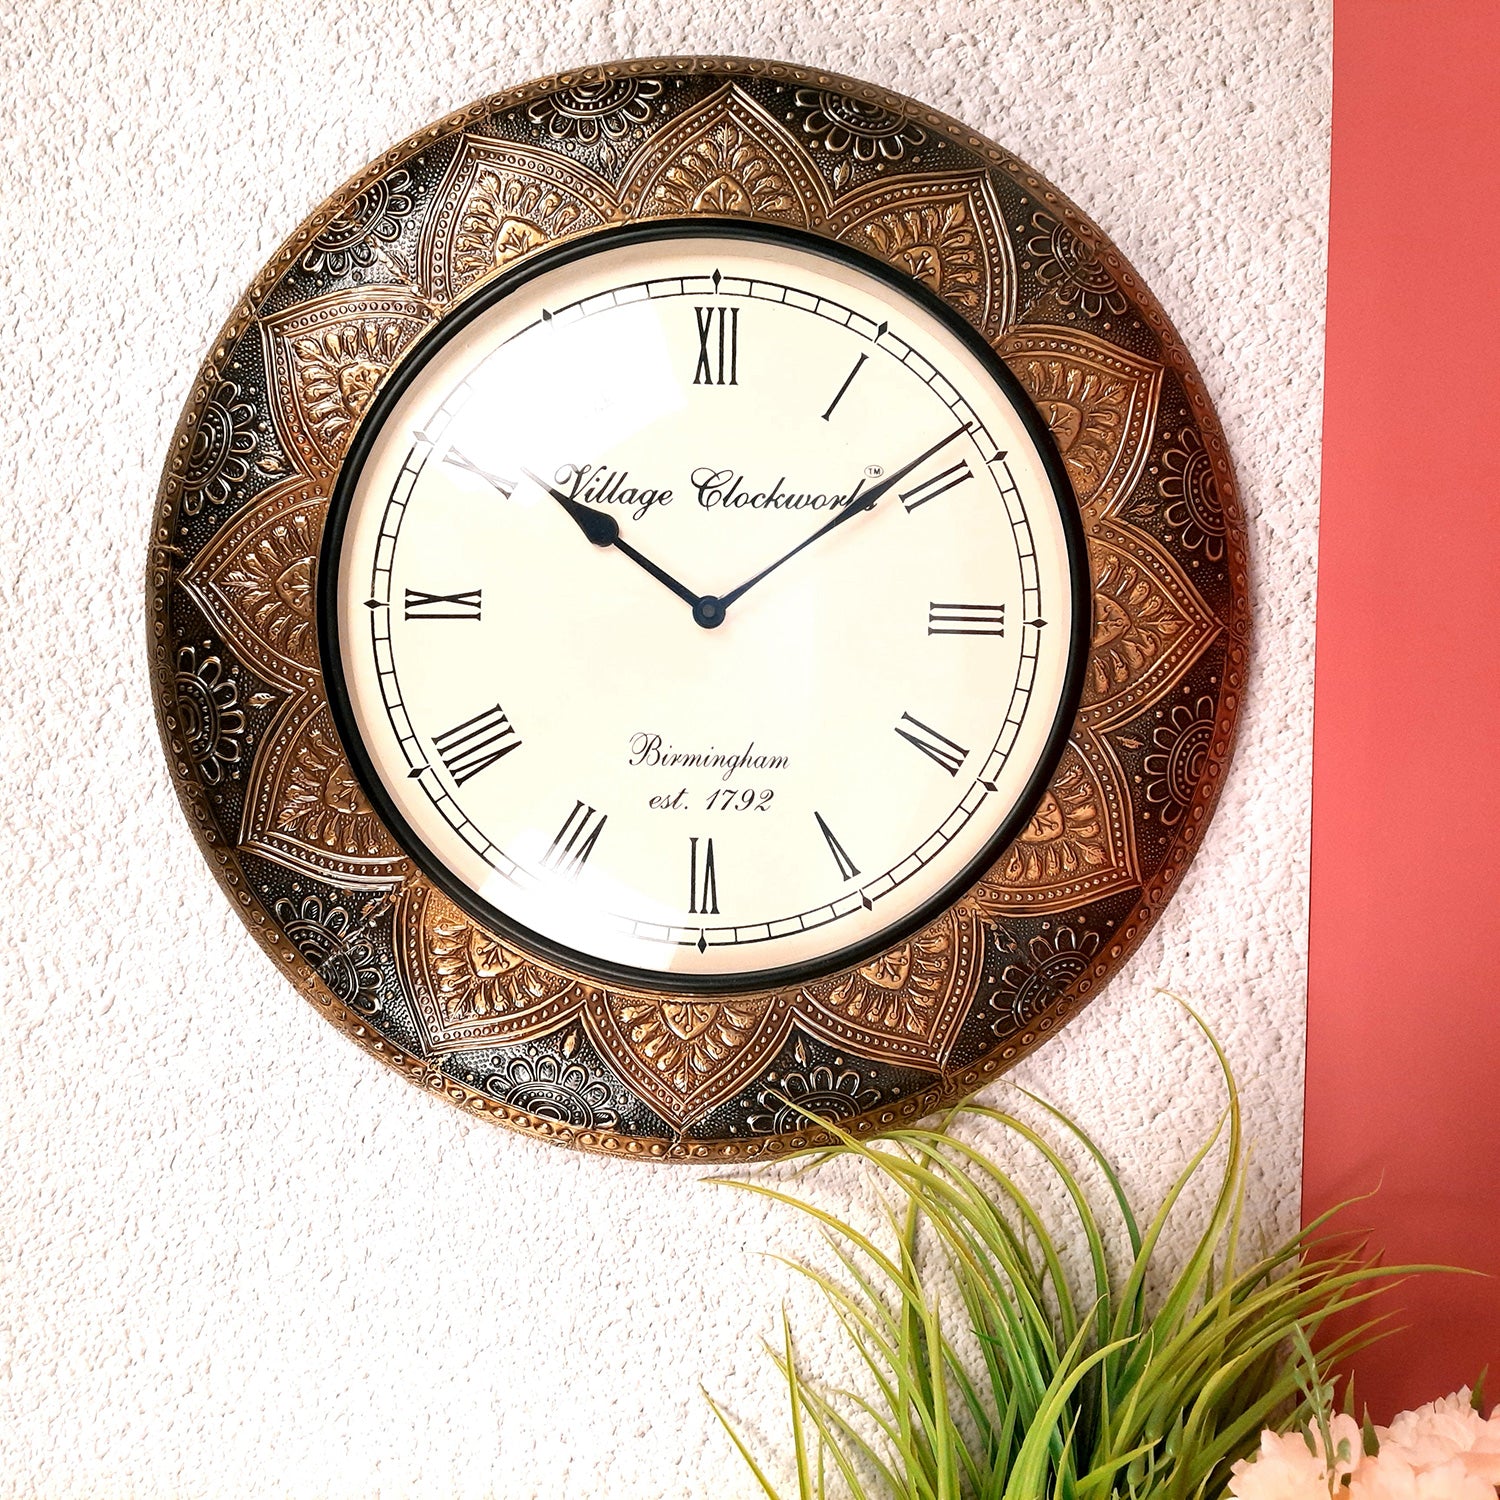 Wall Clock Vintage for Living Room | Wall Mount Clock Antique With Roman Numbers - For Home, Office, Bedroom, Hall Decor & Gifts - 18 inch - Apkamart